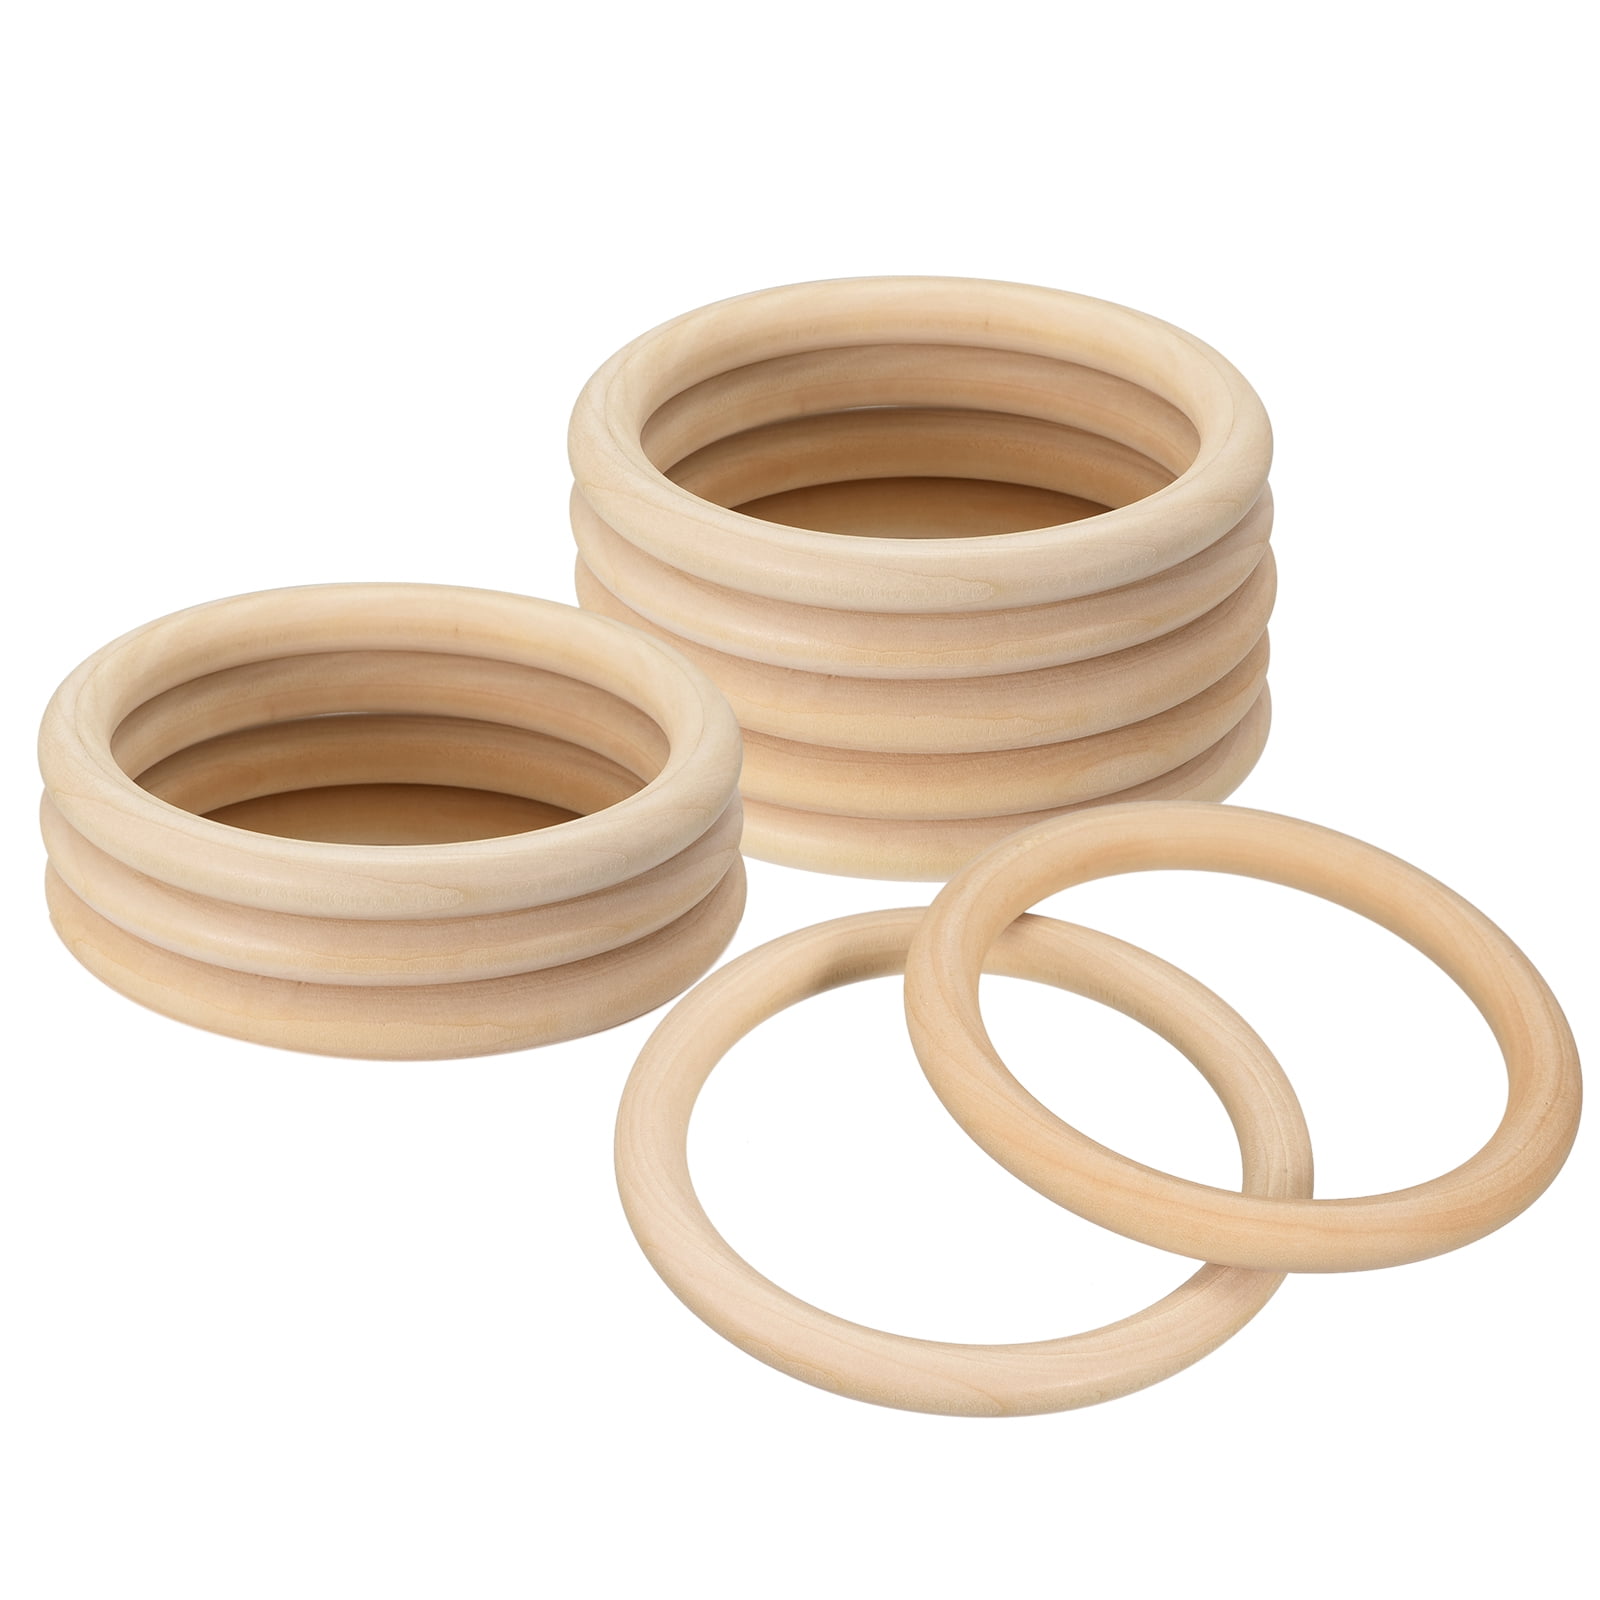 25pcs Nature Wood Rings Wooden Kids DIY Crafts Wholesale Jewelry